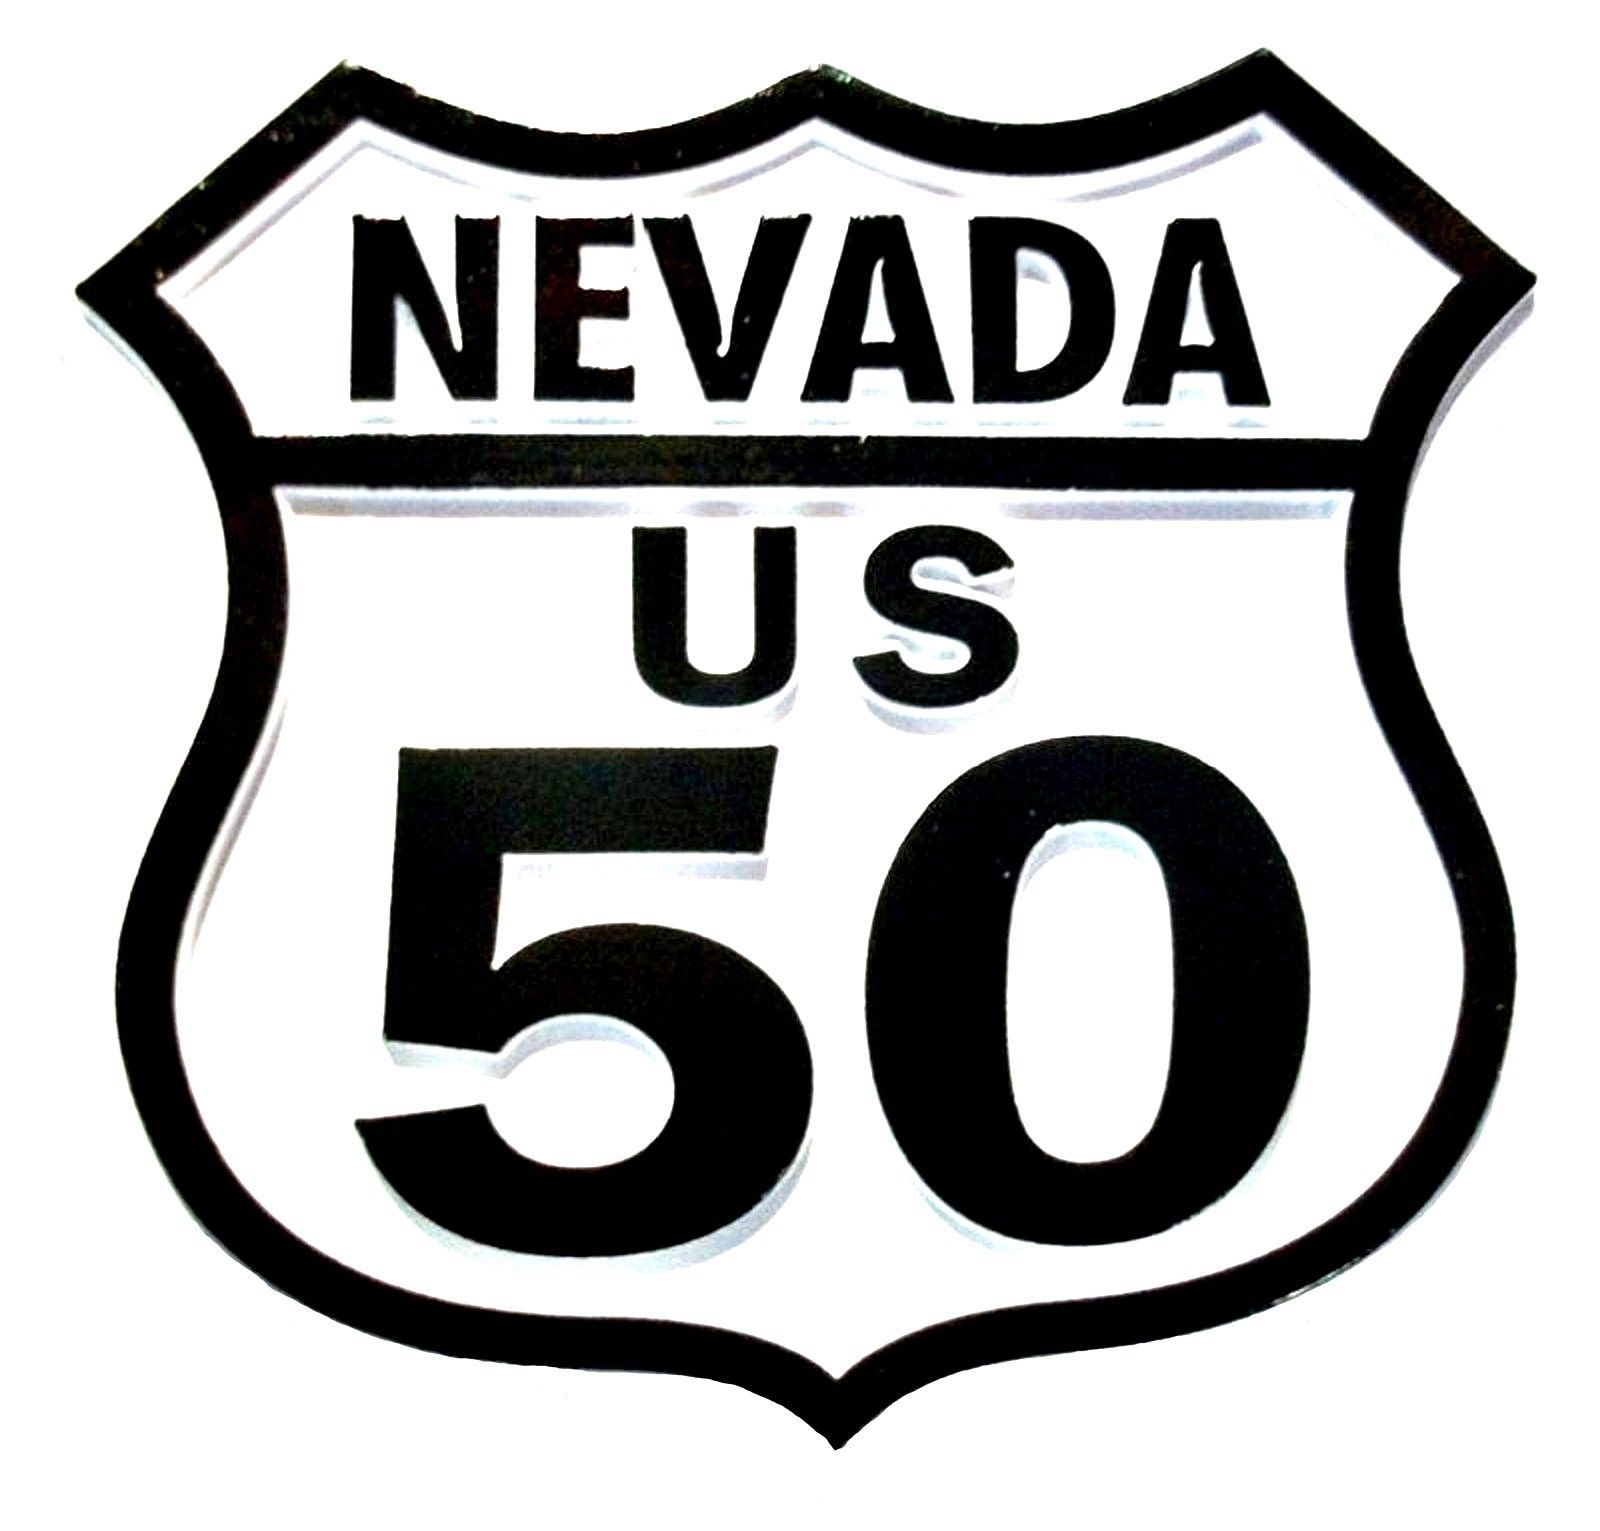 Route 50 Nevada Road Sign Fridge Magnet and similar items